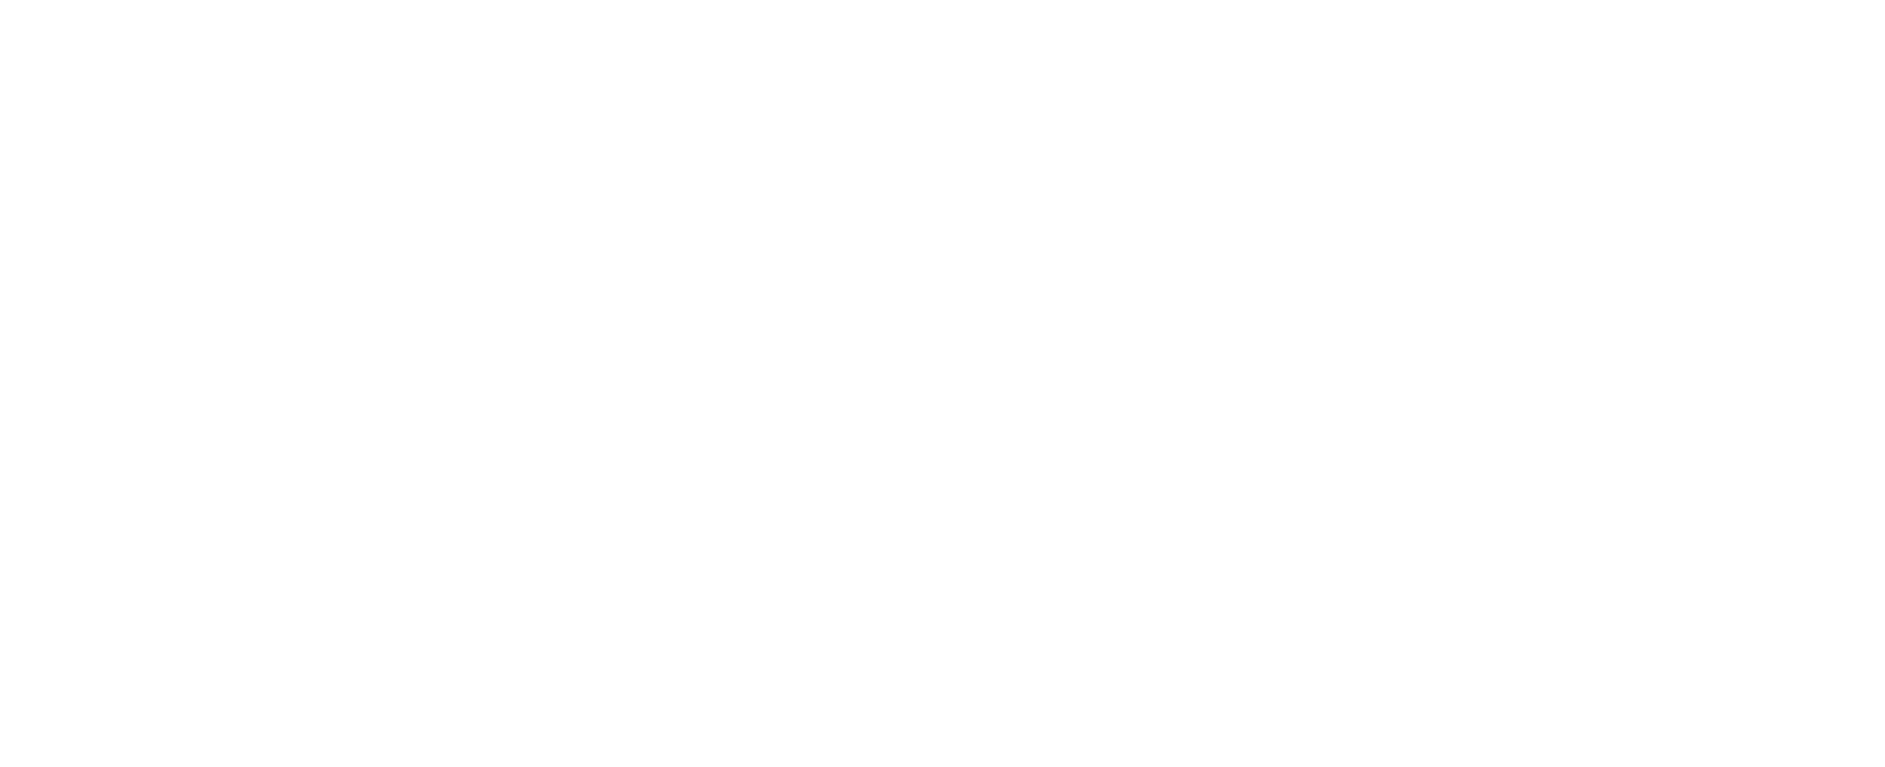 Recycling your ebike battery in Canada